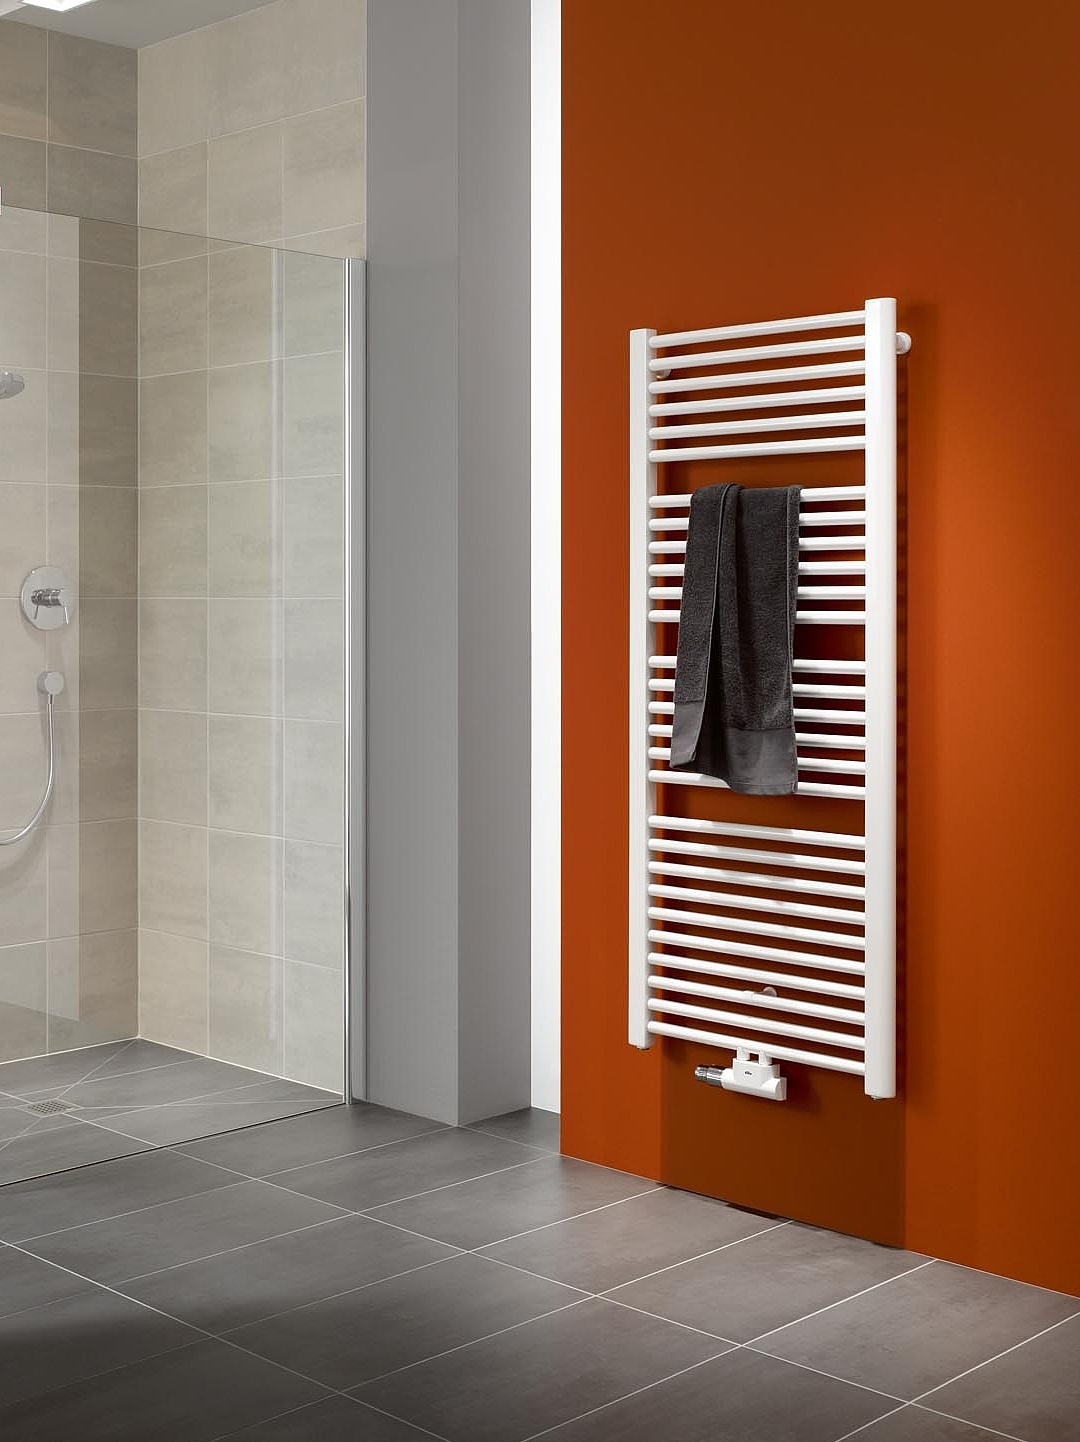 Kermi Basic-50 design and bathroom radiator provides powerful heat output at an attractive price.